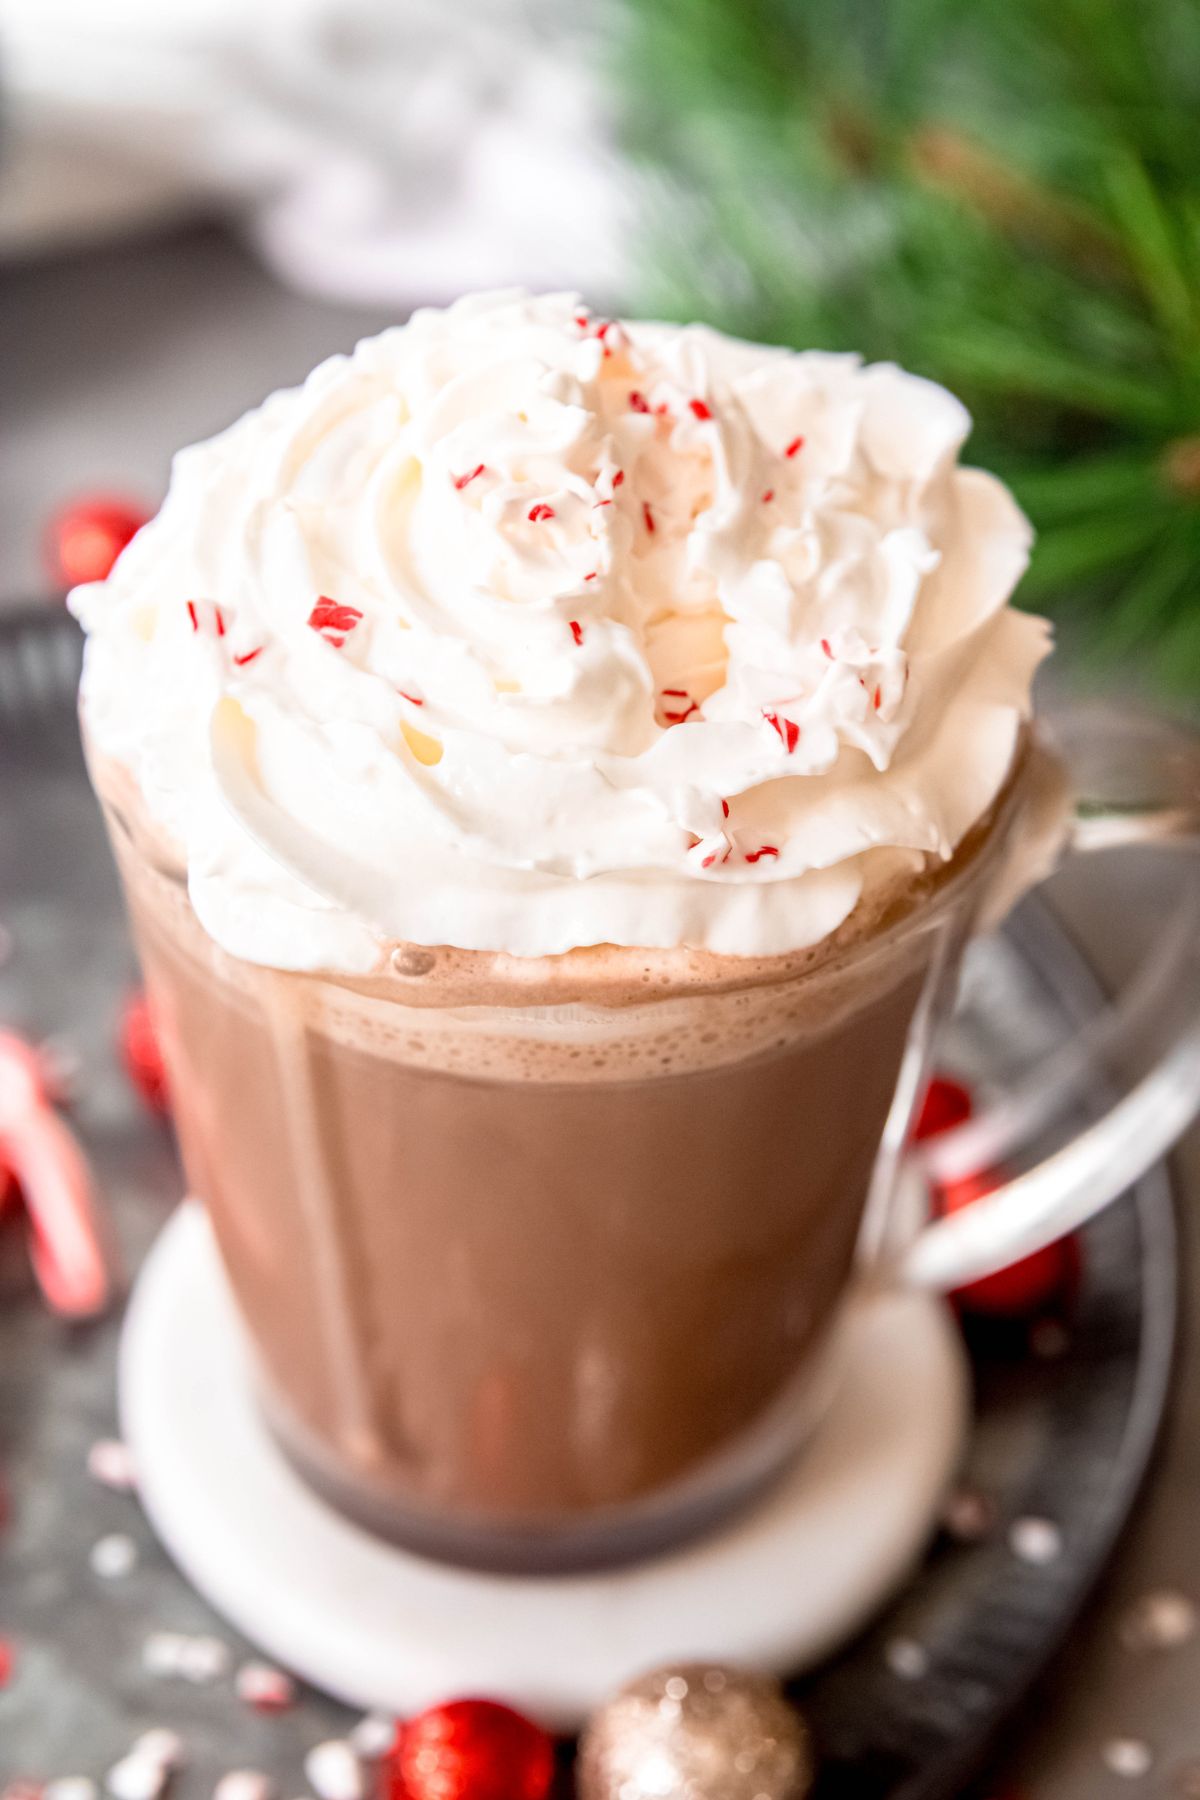 45 degree angle shot of a hot peppermint mocha topped with whipped cream and crushed candy canes.